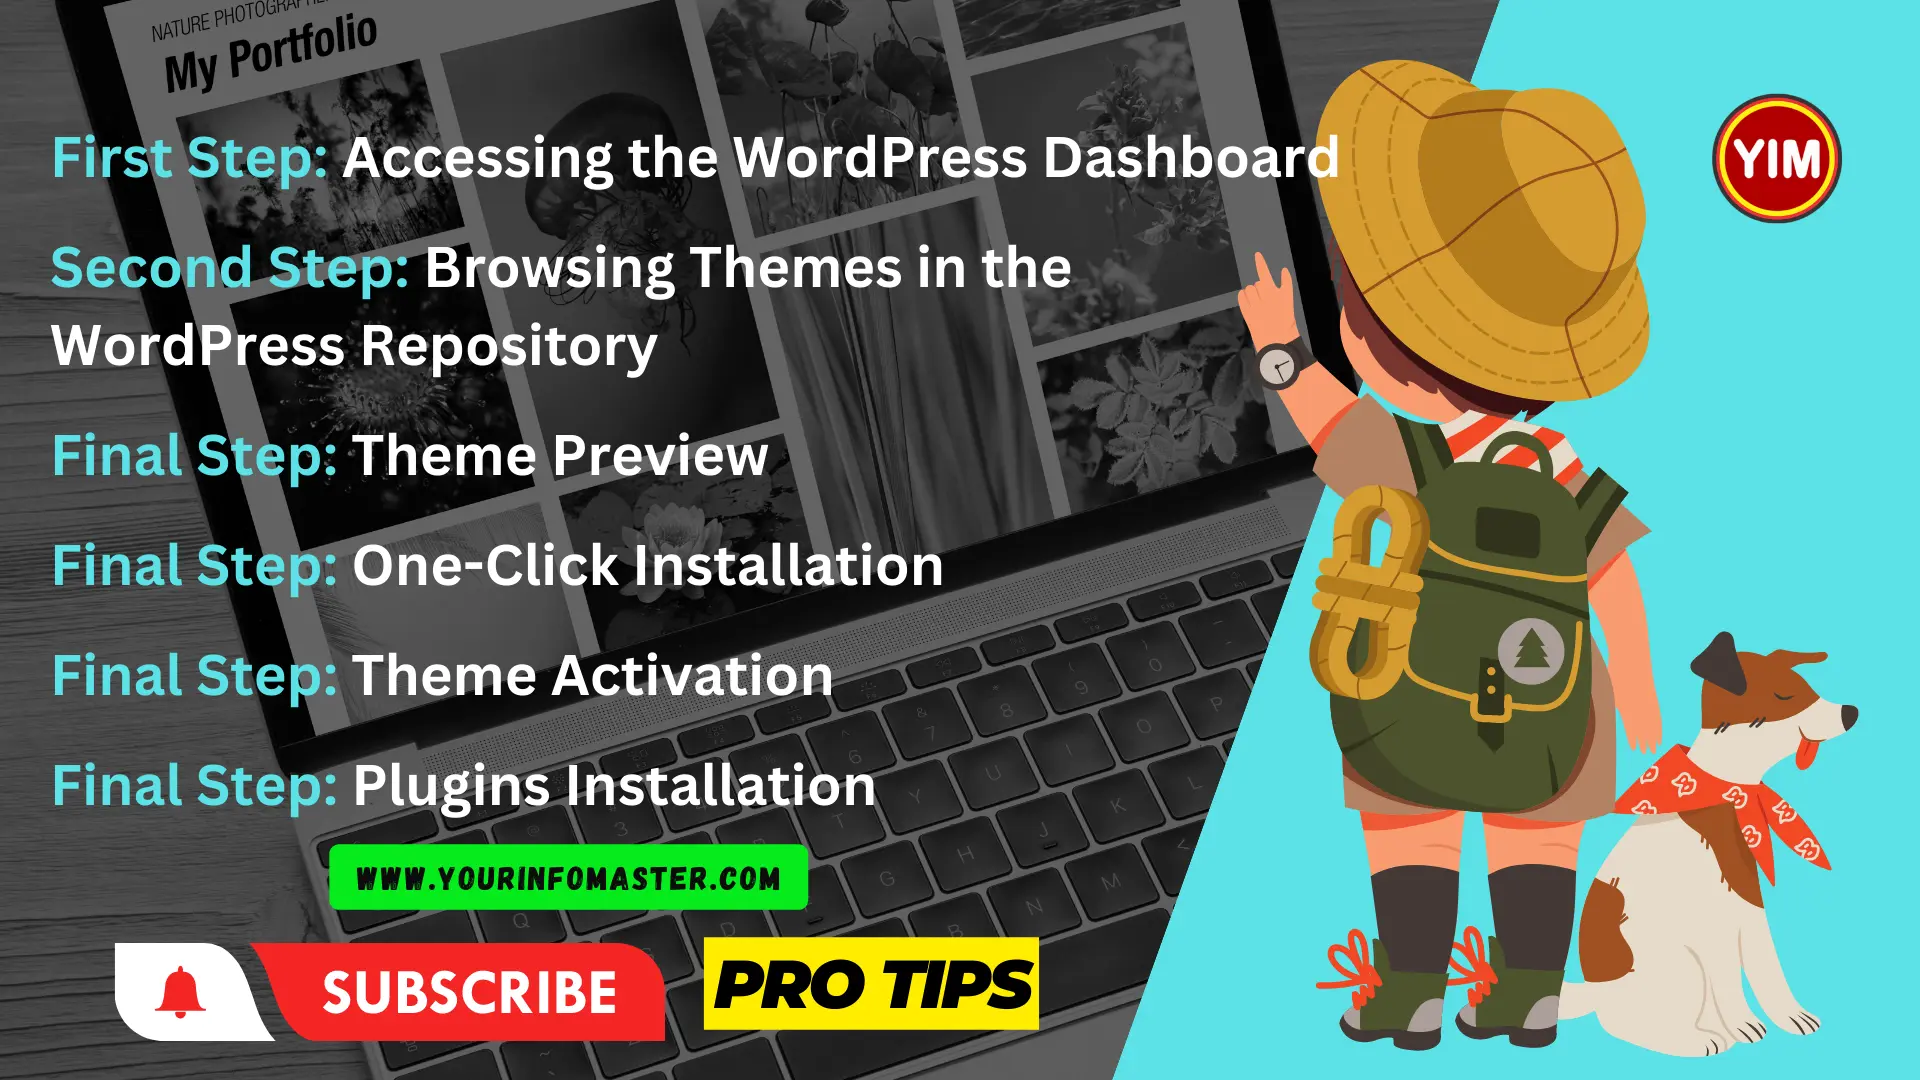 How to Install WordPress Theme in your Website With One Click 1